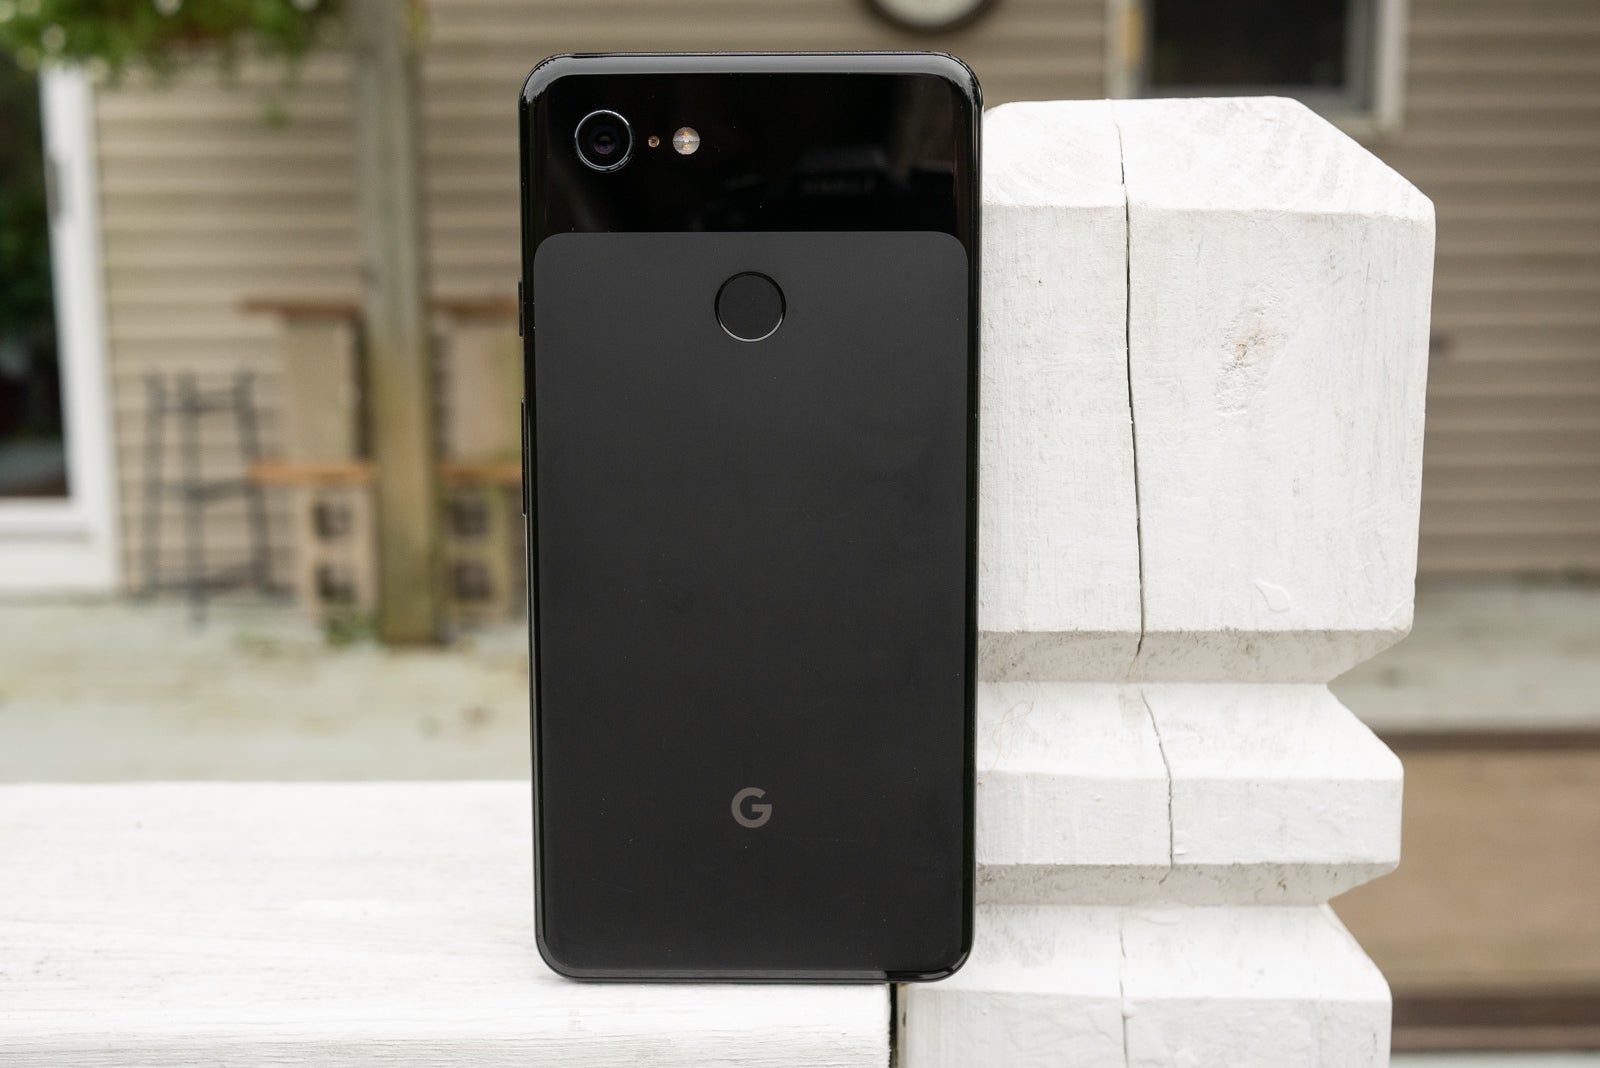 The Google Pixel 3 XL with 100GB of data is just £25 per month at Three